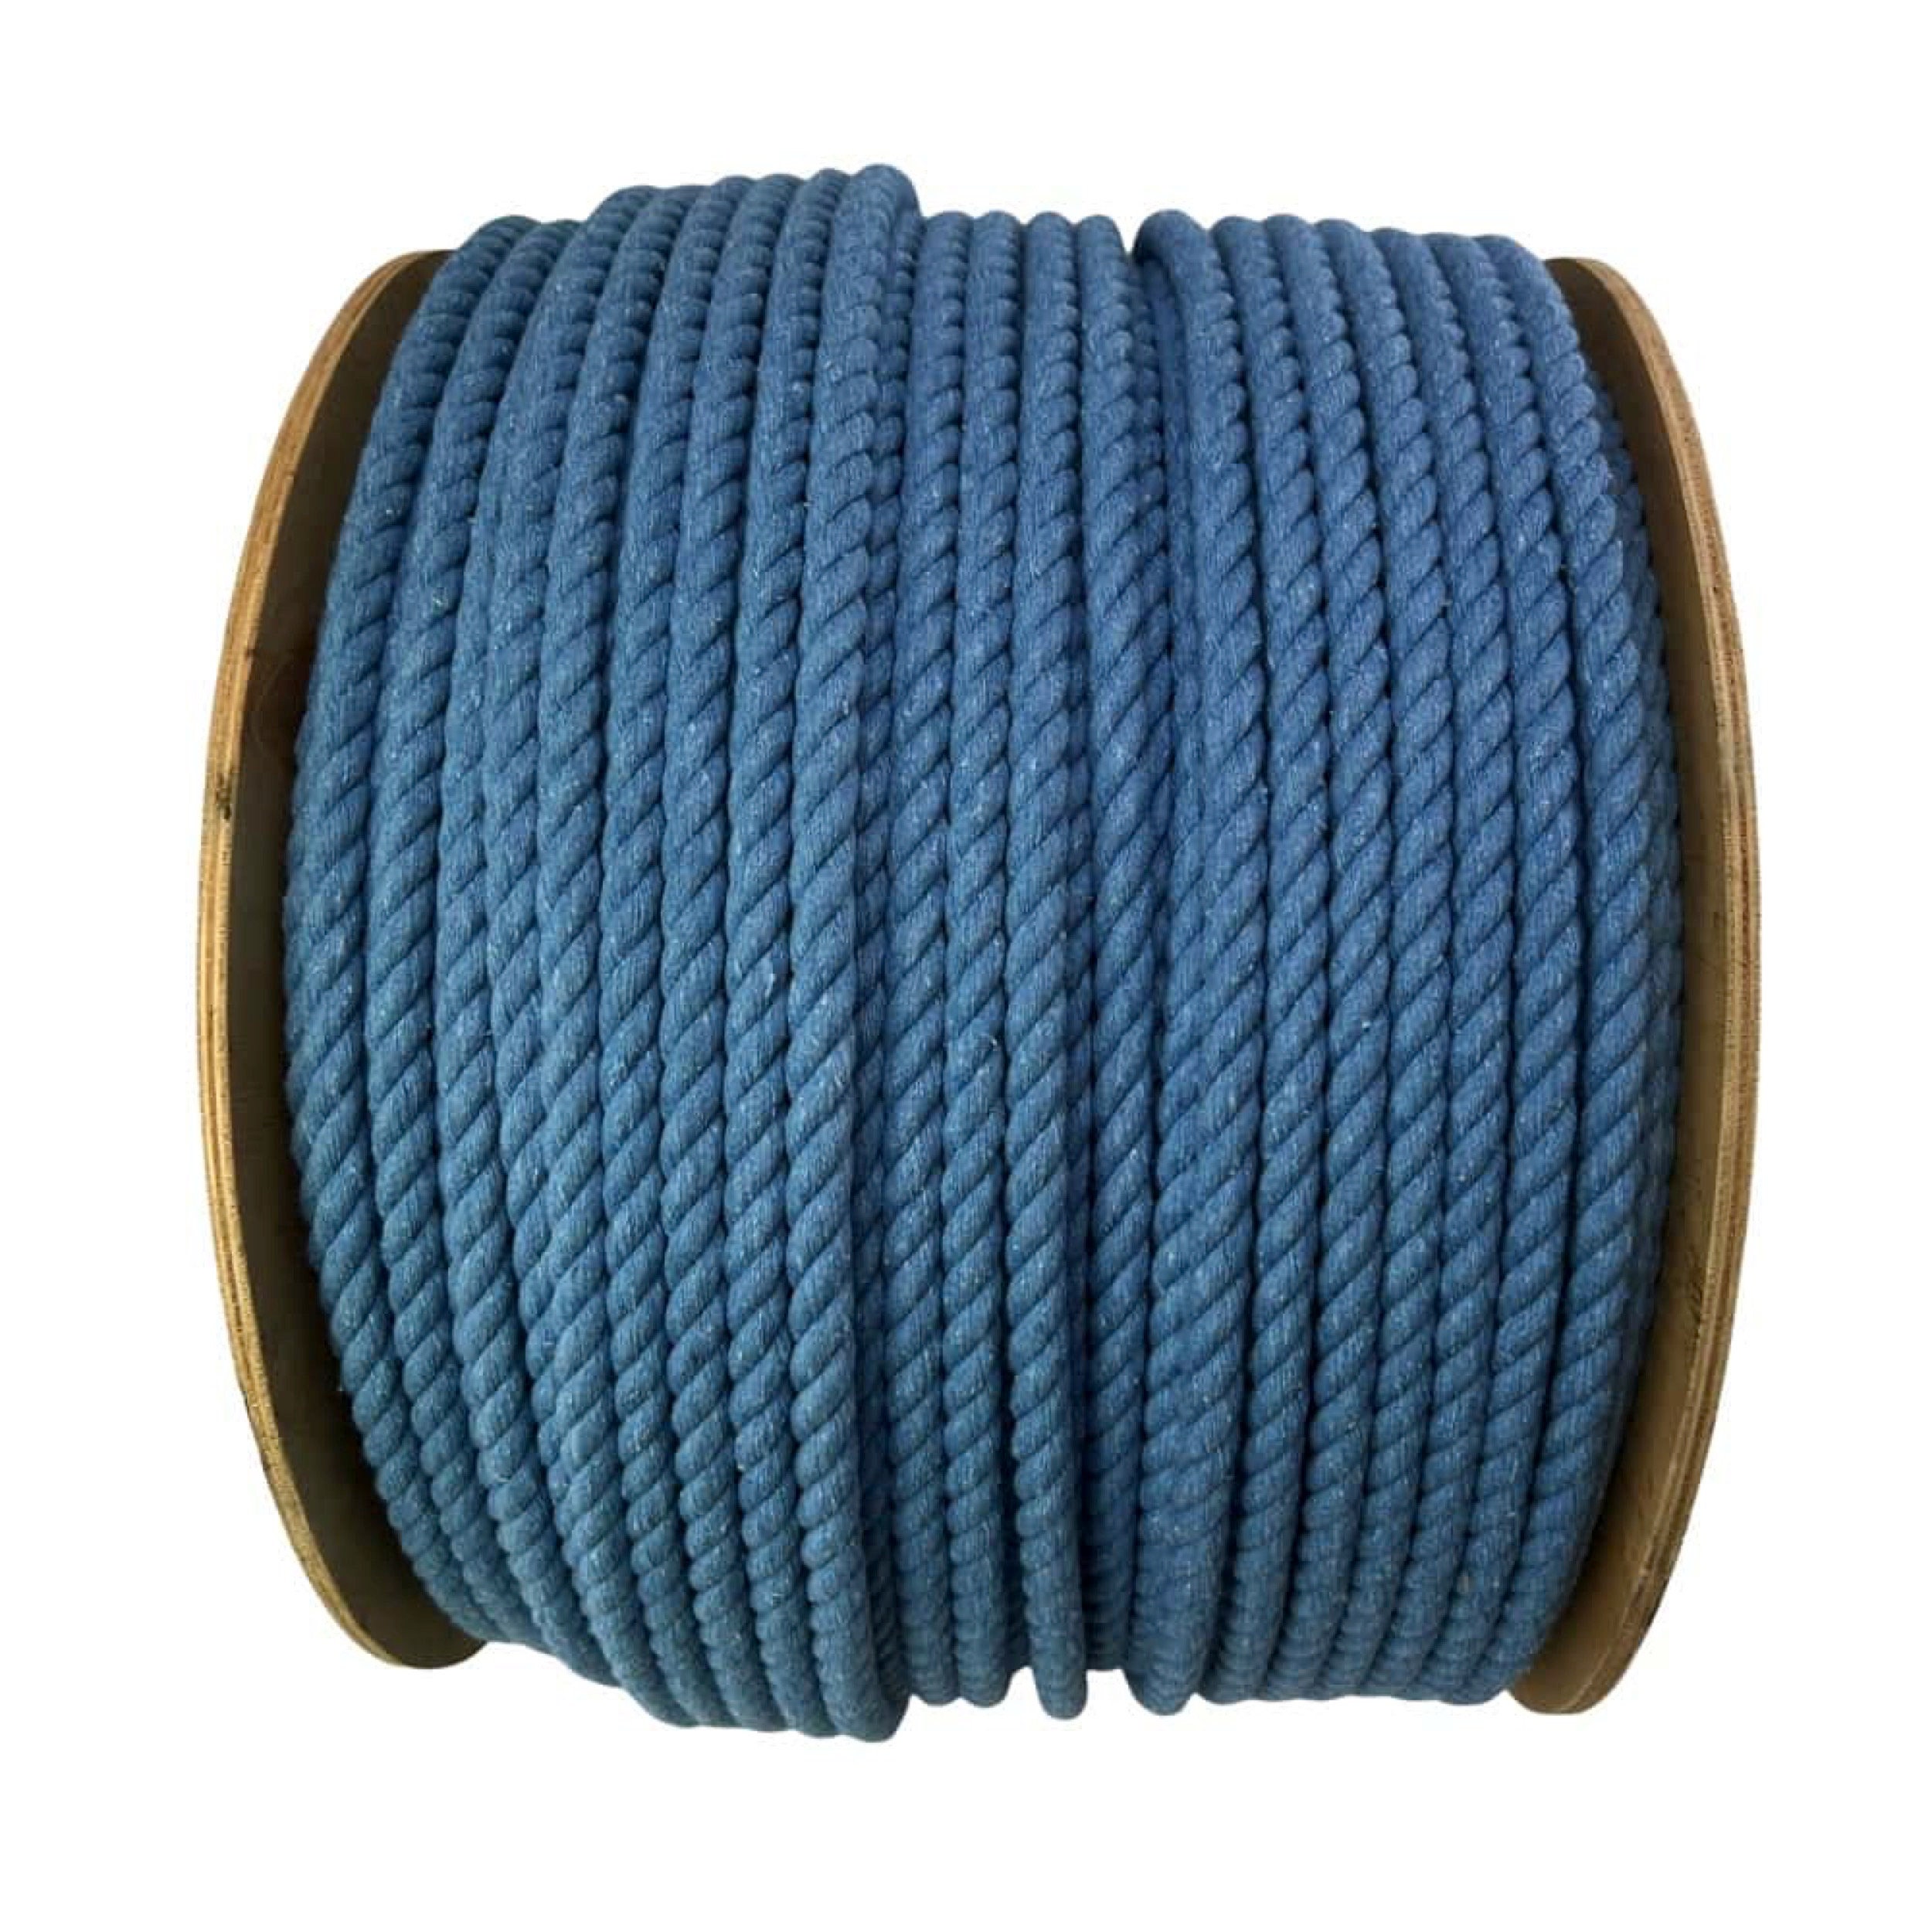 10mm Natural Sky Blue Cotton Rope on A Reel, 3 Strand Cord